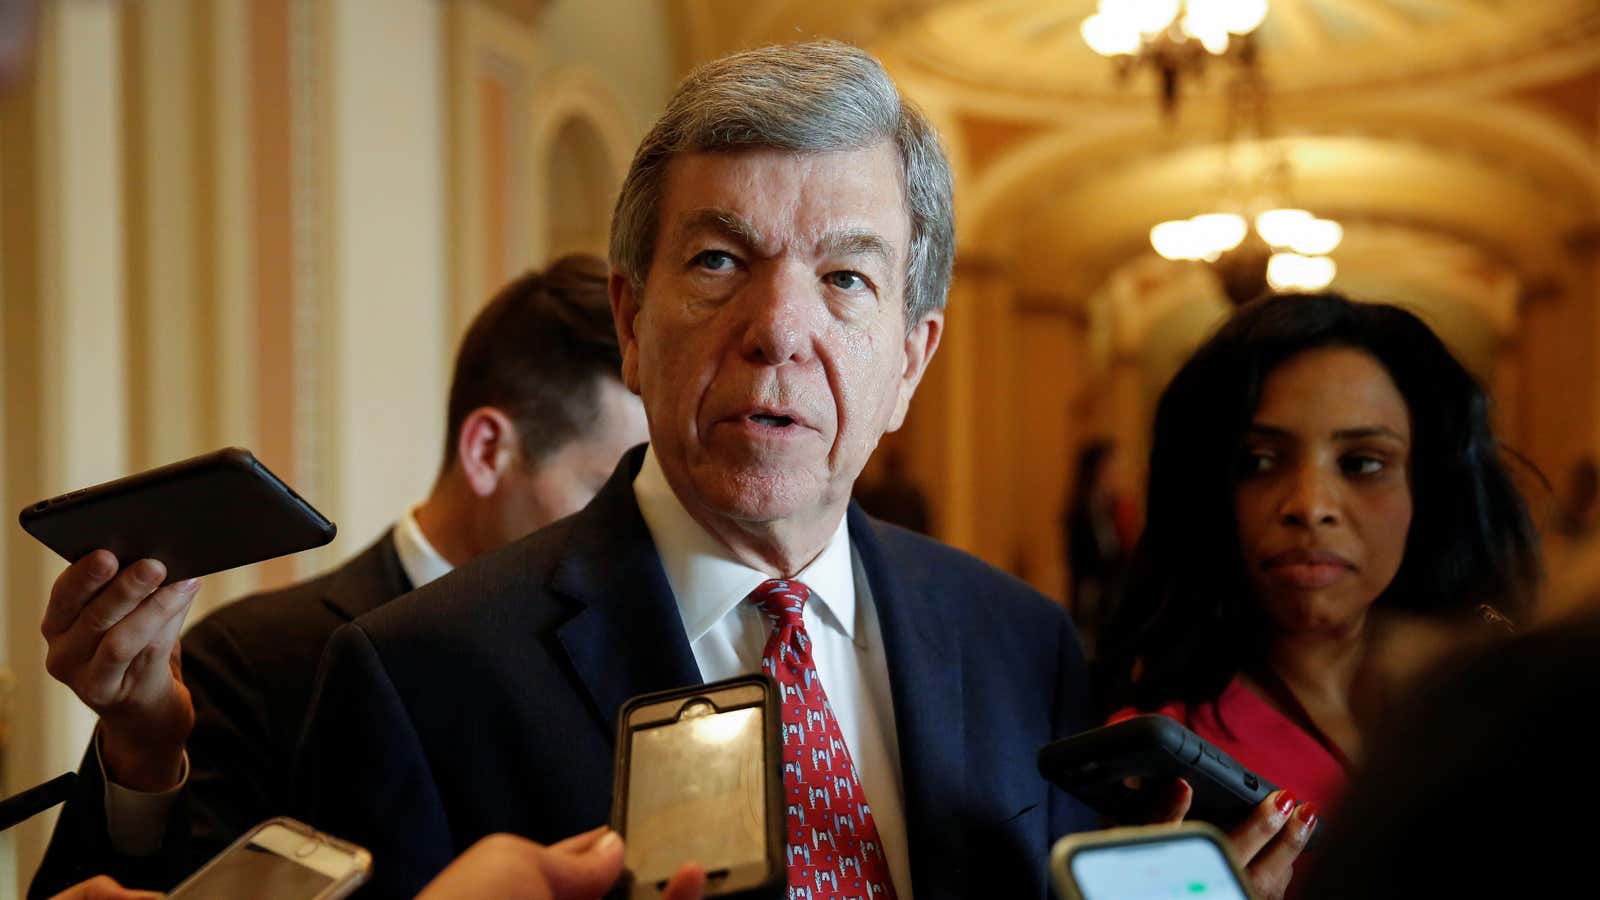 Roy Blunt of Missouri said he was voting to block Trump because Democrats could use a national emergency to impose gun control.